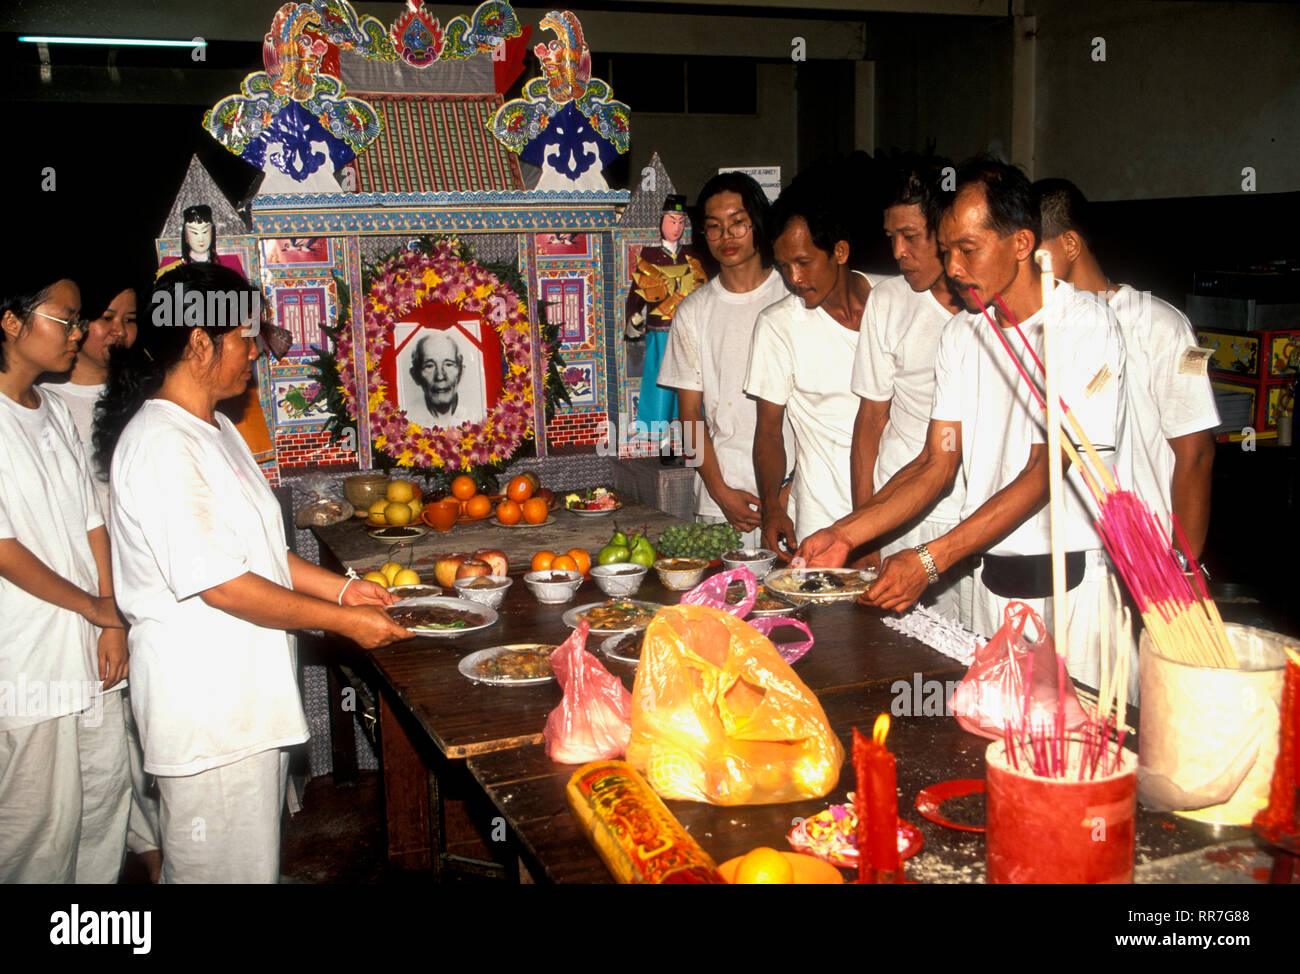 Family relatives observe Chinese funeral obsequies in Malacca, Malaysia with offerings of fruit and incense for the departed. Stock Photo